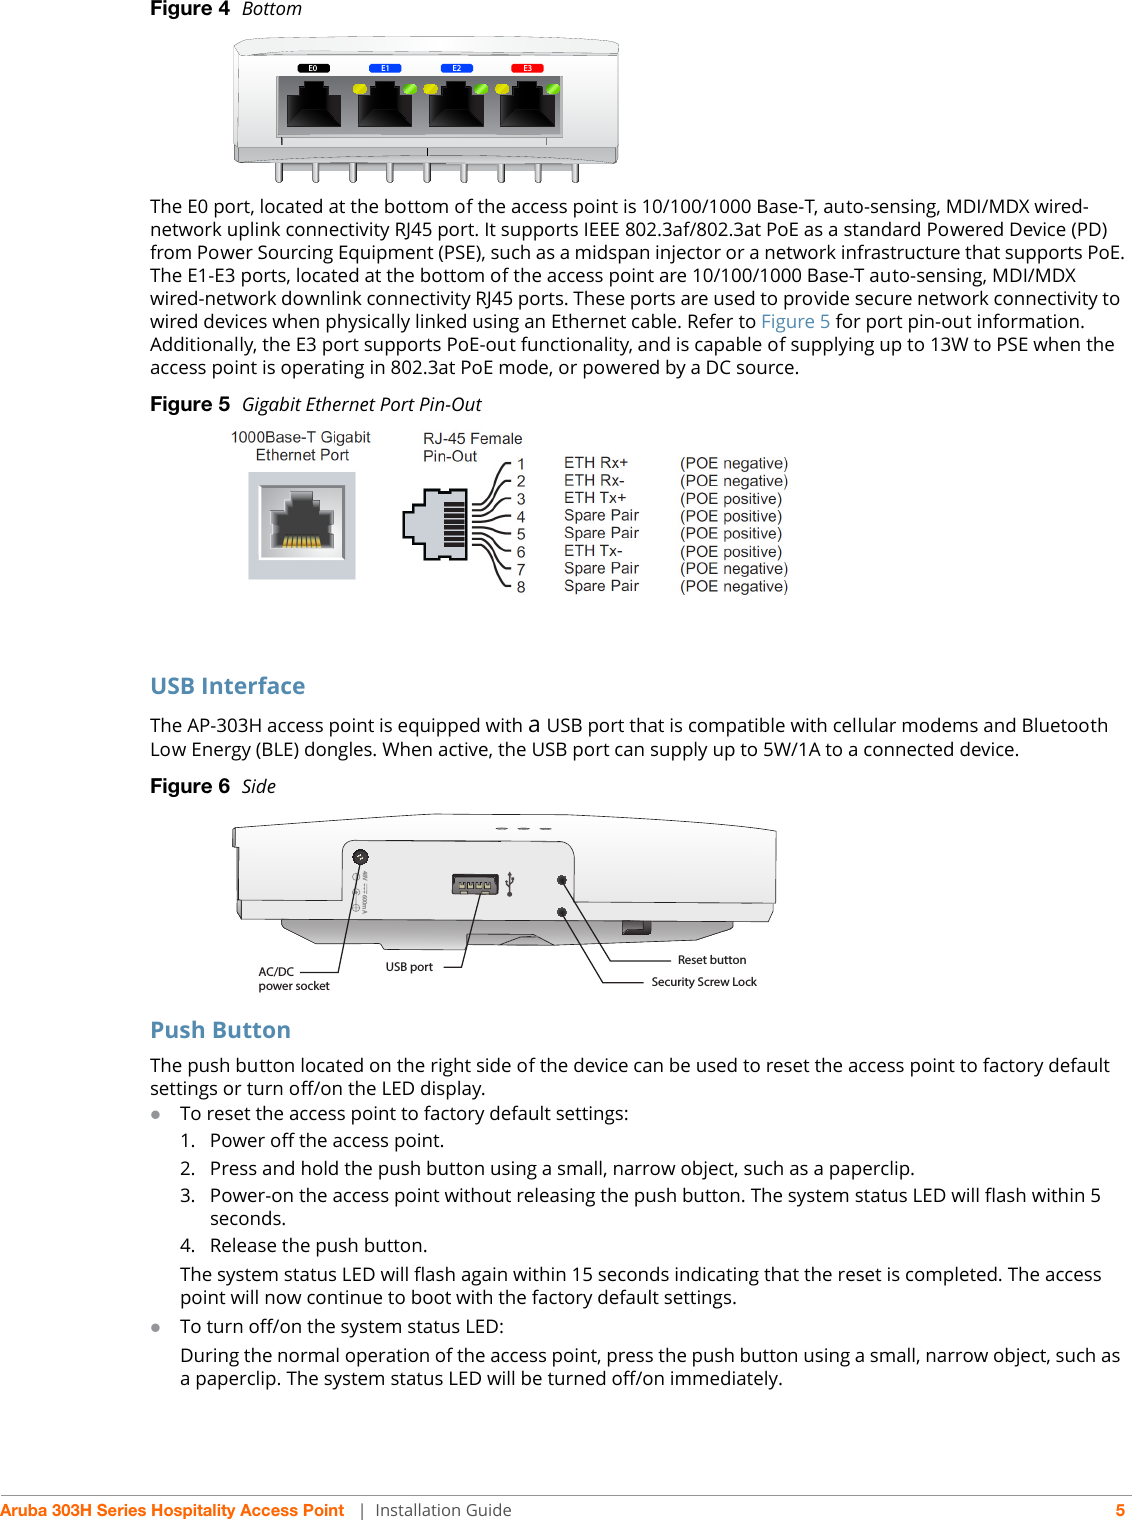 Aruba 303H Series Hospitality Access Point  | Installation Guide 5Figure 4  Bottom The E0 port, located at the bottom of the access point is 10/100/1000 Base-T, auto-sensing, MDI/MDX wired-network uplink connectivity RJ45 port. It supports IEEE 802.3af/802.3at PoE as a standard Powered Device (PD) from Power Sourcing Equipment (PSE), such as a midspan injector or a network infrastructure that supports PoE.The E1-E3 ports, located at the bottom of the access point are 10/100/1000 Base-T auto-sensing, MDI/MDX wired-network downlink connectivity RJ45 ports. These ports are used to provide secure network connectivity to wired devices when physically linked using an Ethernet cable. Refer to Figure 5 for port pin-out information.Additionally, the E3 port supports PoE-out functionality, and is capable of supplying up to 13W to PSE when the access point is operating in 802.3at PoE mode, or powered by a DC source.Figure 5  Gigabit Ethernet Port Pin-OutUSB InterfaceThe AP-303H access point is equipped with a USB port that is compatible with cellular modems and Bluetooth Low Energy (BLE) dongles. When active, the USB port can supply up to 5W/1A to a connected device.Figure 6  SidePush ButtonThe push button located on the right side of the device can be used to reset the access point to factory default settings or turn off/on the LED display. To reset the access point to factory default settings:1. Power off the access point.2. Press and hold the push button using a small, narrow object, such as a paperclip.3. Power-on the access point without releasing the push button. The system status LED will flash within 5 seconds.4. Release the push button.The system status LED will flash again within 15 seconds indicating that the reset is completed. The access point will now continue to boot with the factory default settings.To turn off/on the system status LED:During the normal operation of the access point, press the push button using a small, narrow object, such as a paperclip. The system status LED will be turned off/on immediately.E0E0 E3E2E148V 600mAAC/DC power socketUSB port Reset buttonSecurity Screw Lock